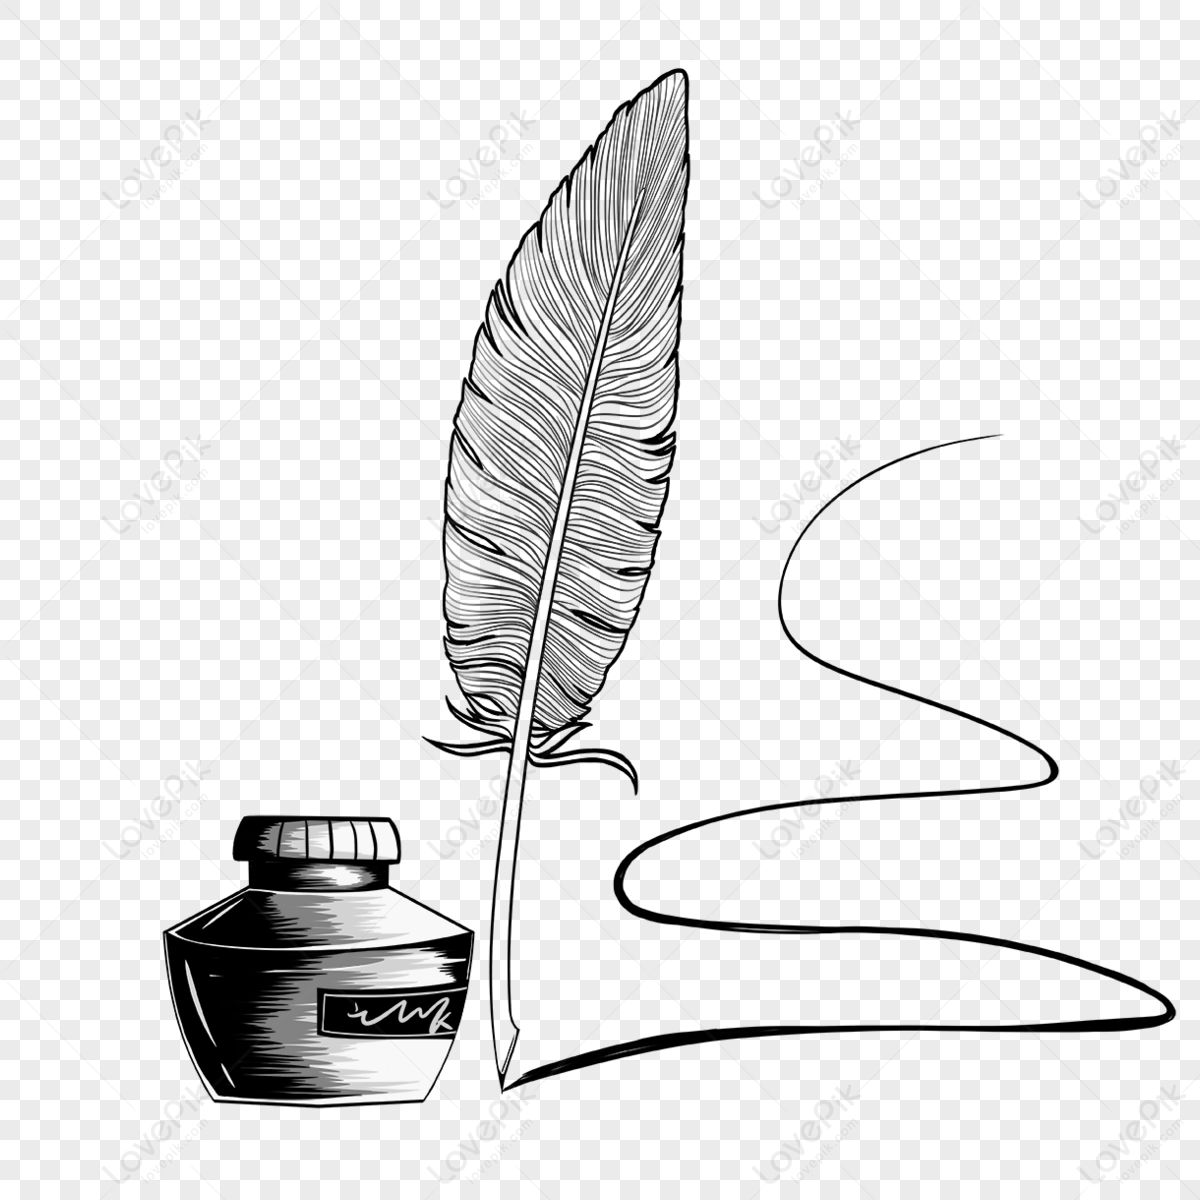 Hand Drawn Sketchy Ink Bottle And Feather Quill Pen High-Res Vector Graphic  - Getty Images